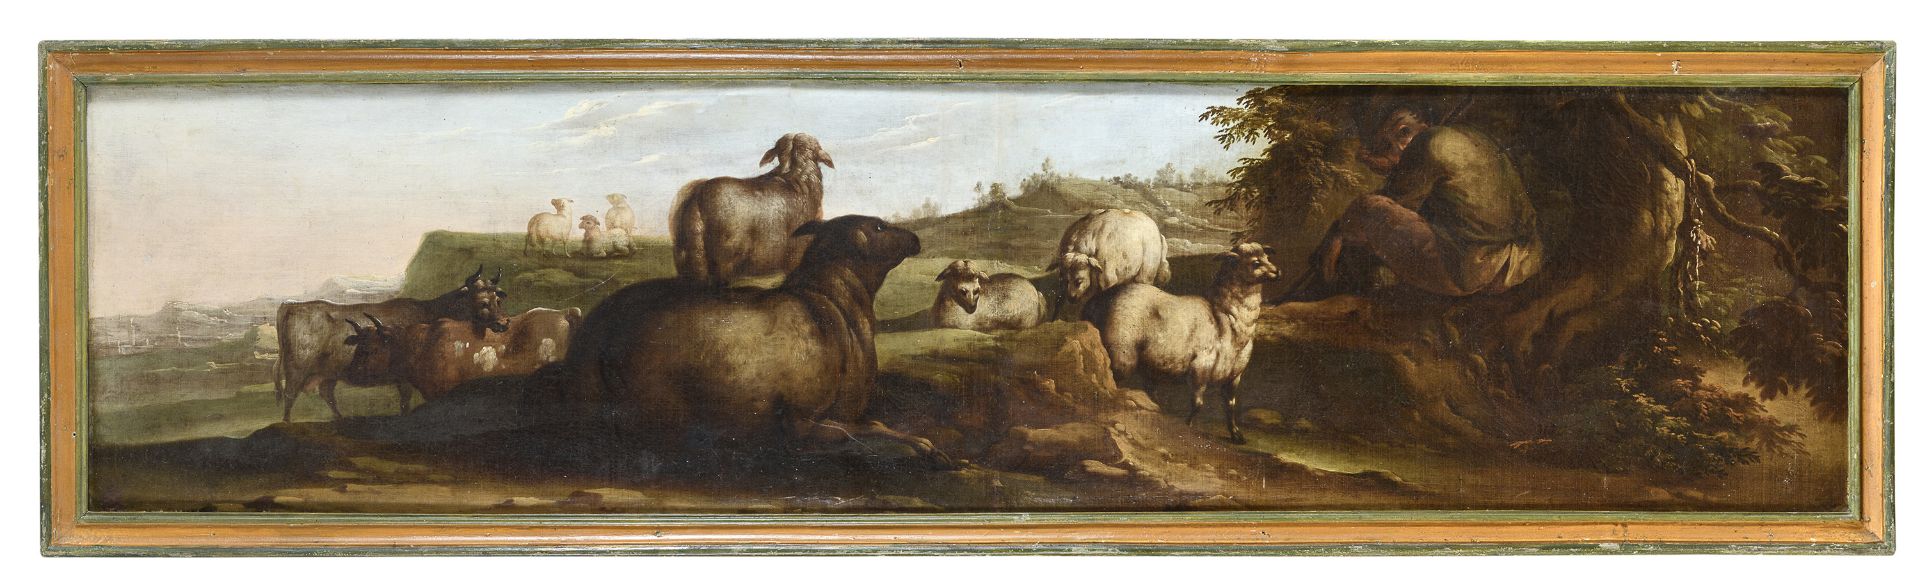 TWO OIL PAINTINGS BY FLEMISH PAINTER ACTIVE IN ITALY 18TH CENTURY